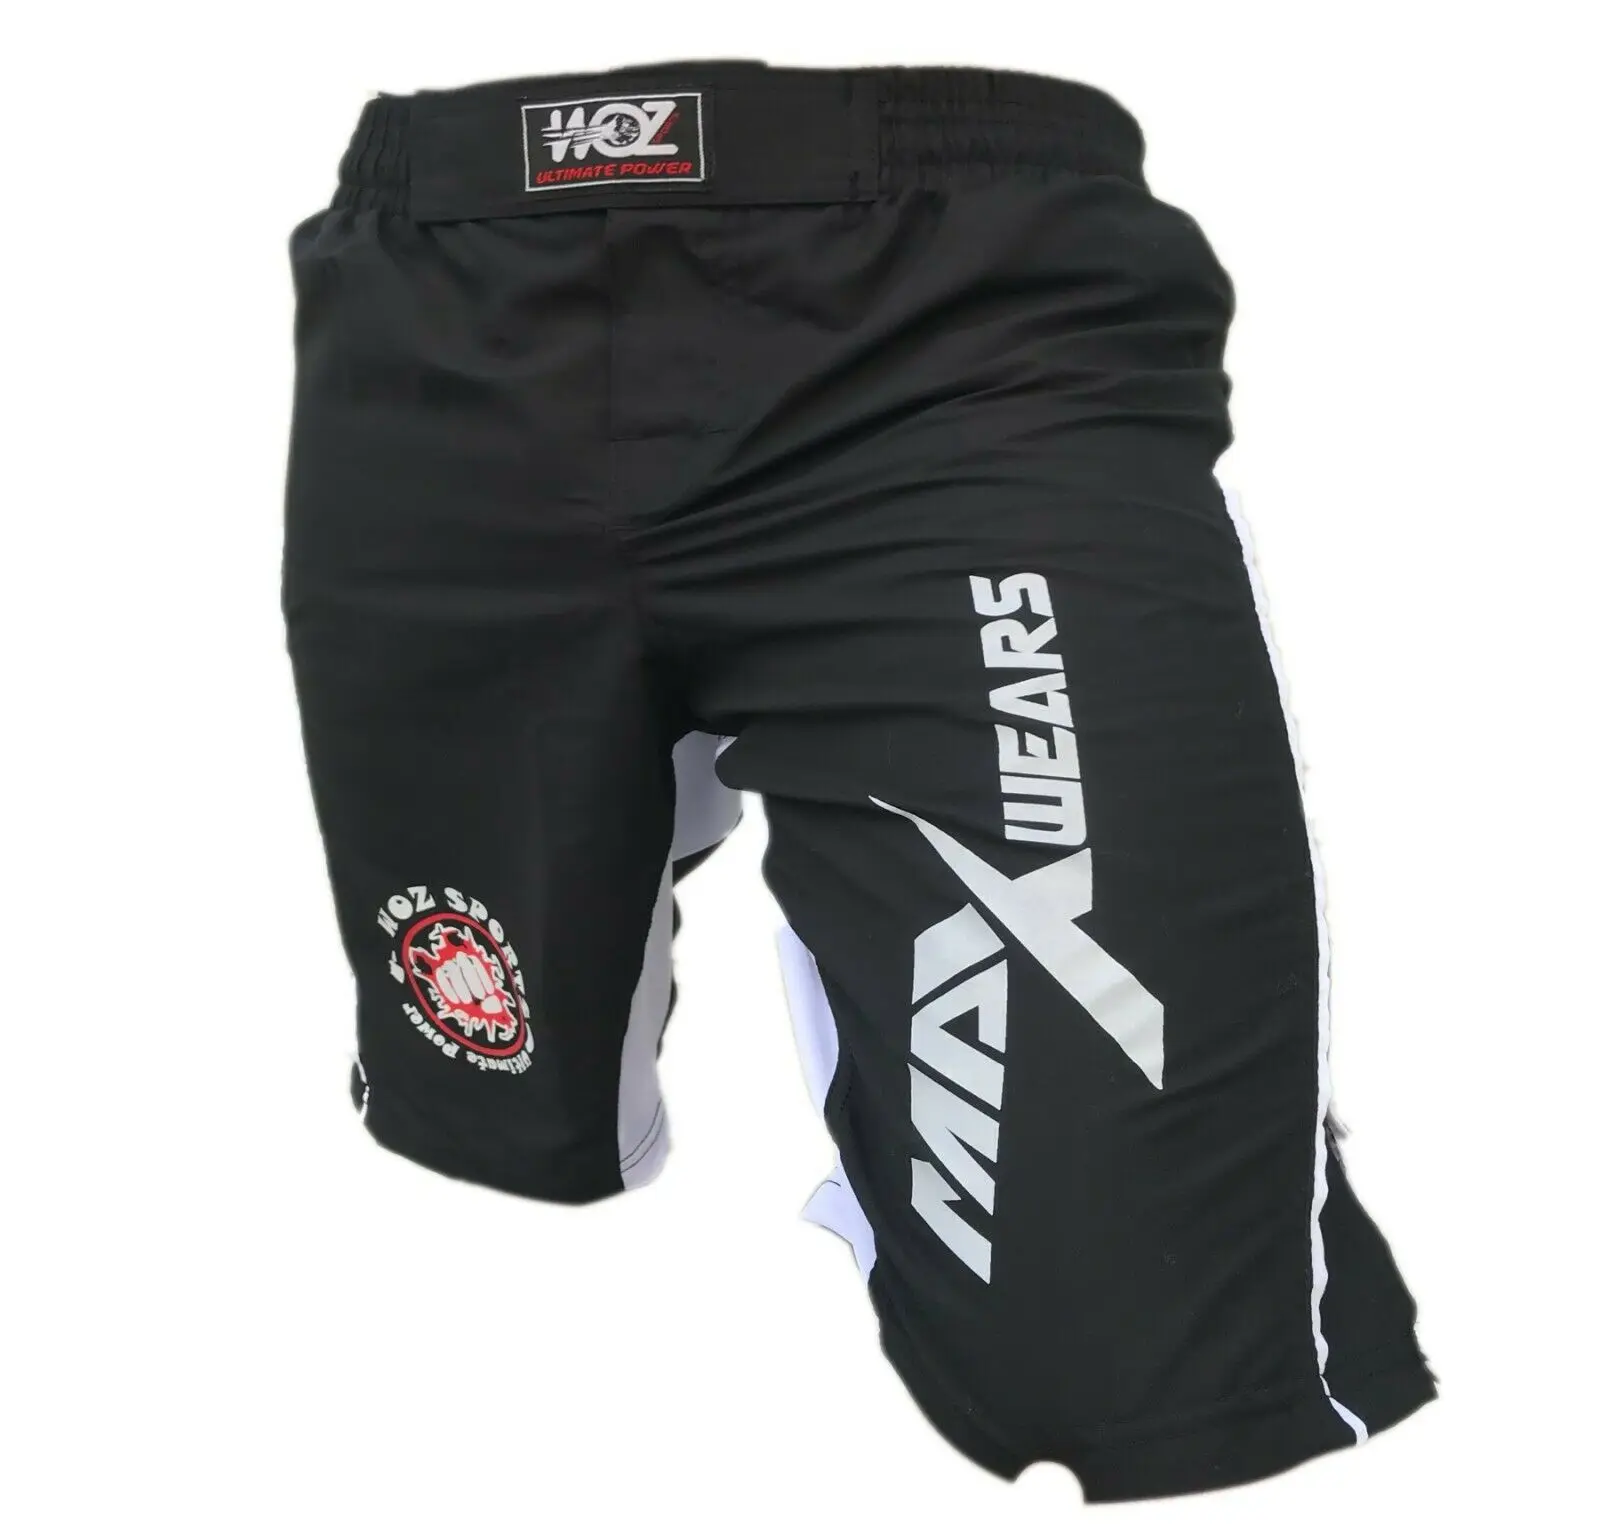 Kick Boxing MMA Shorts UFC Cage Fight Fighter Grappling Muay Thai BJJ Training 